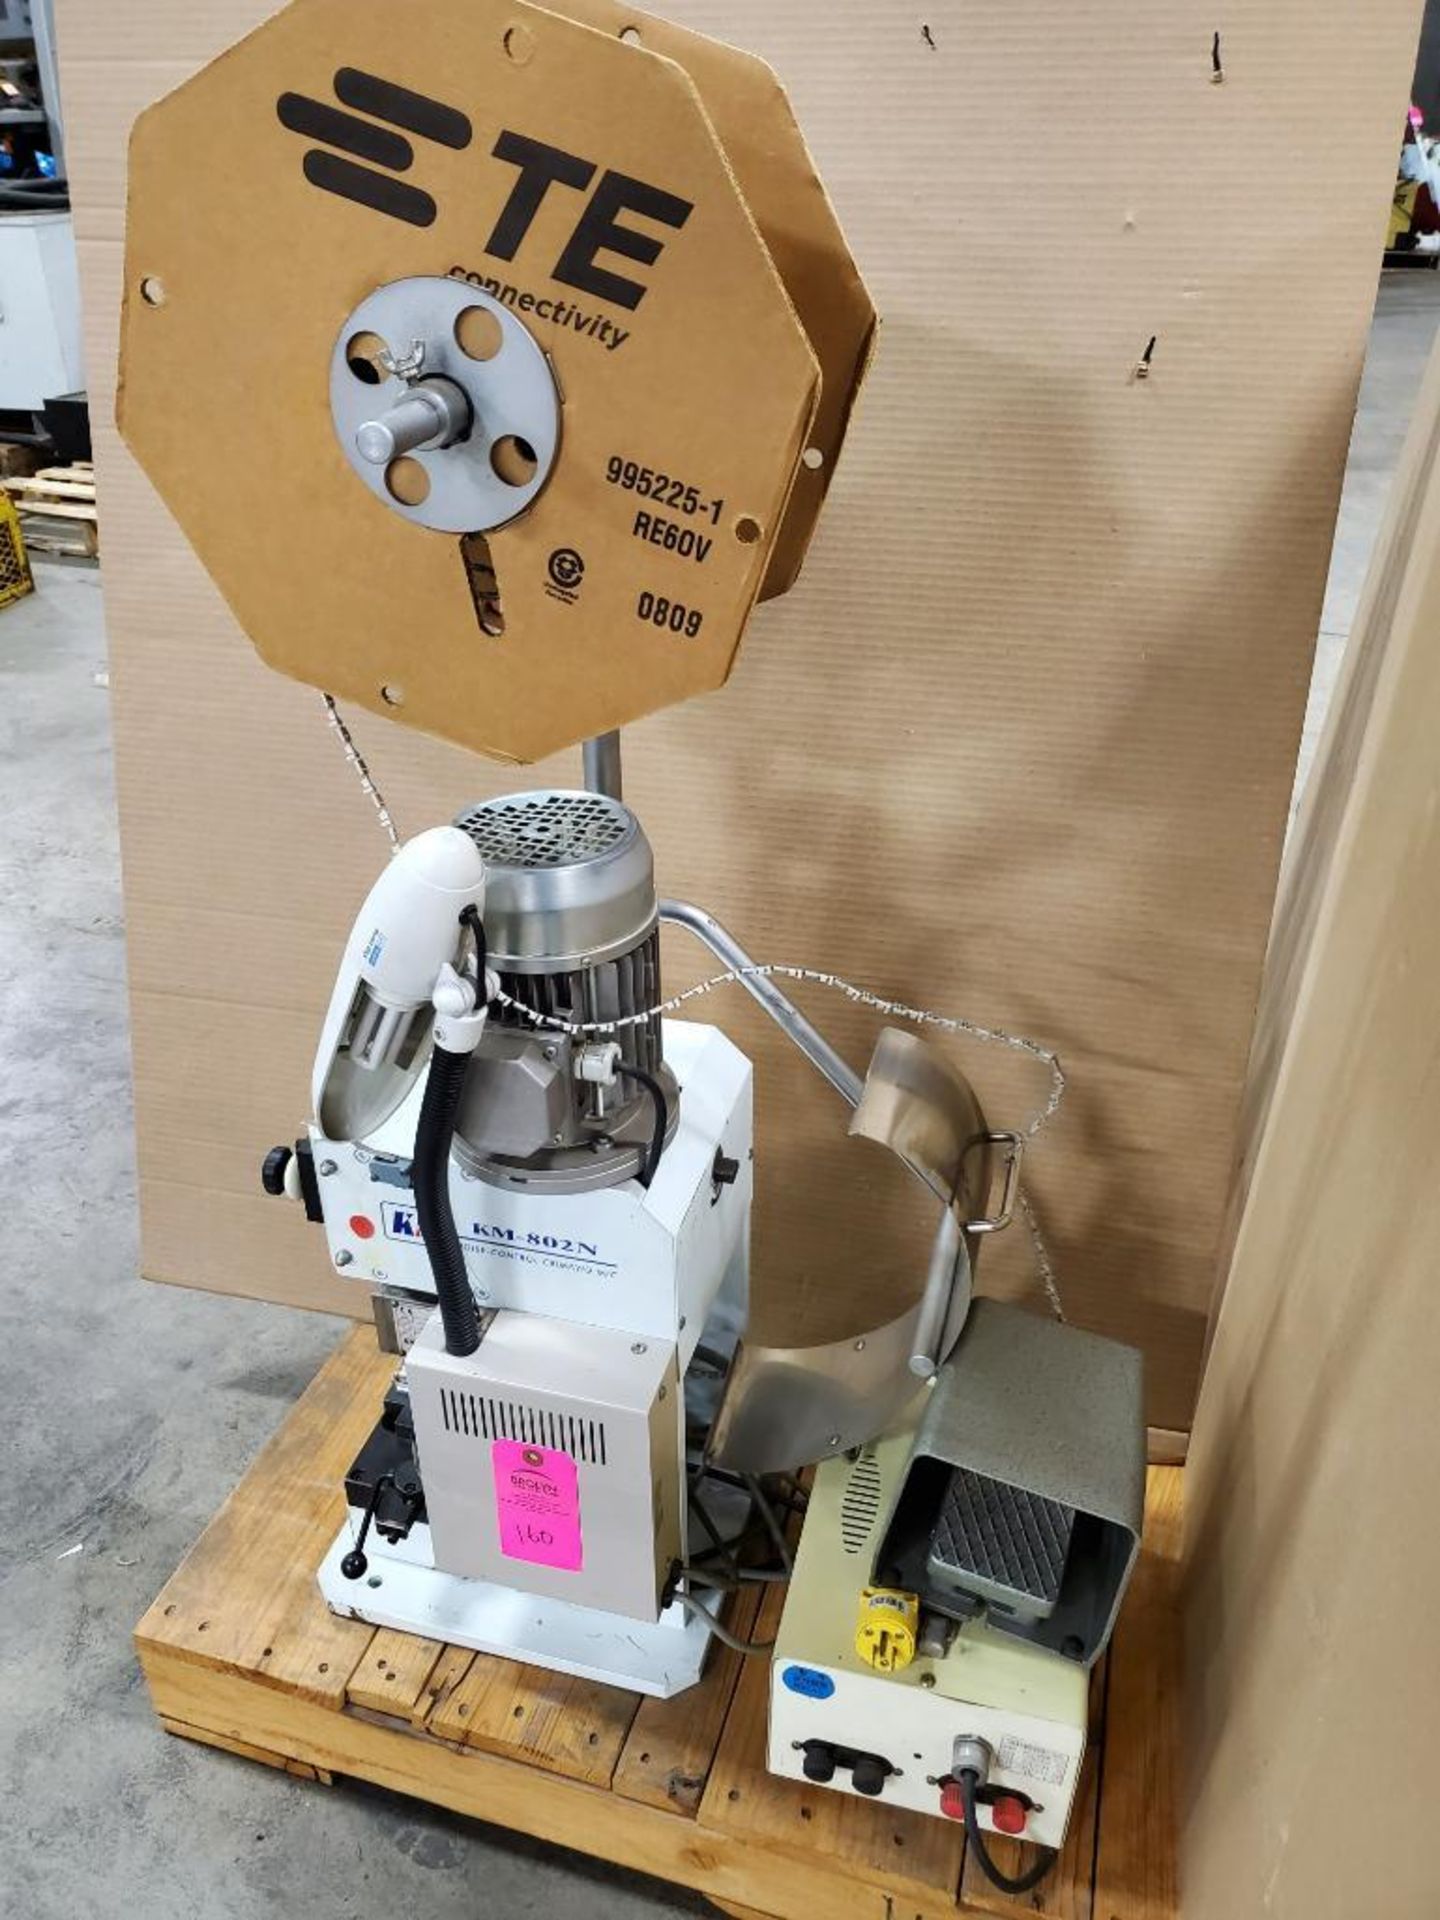 KM Digitech terminal crimping machine. Model KM-802N. Includes spade connector die as pictured. - Image 10 of 10